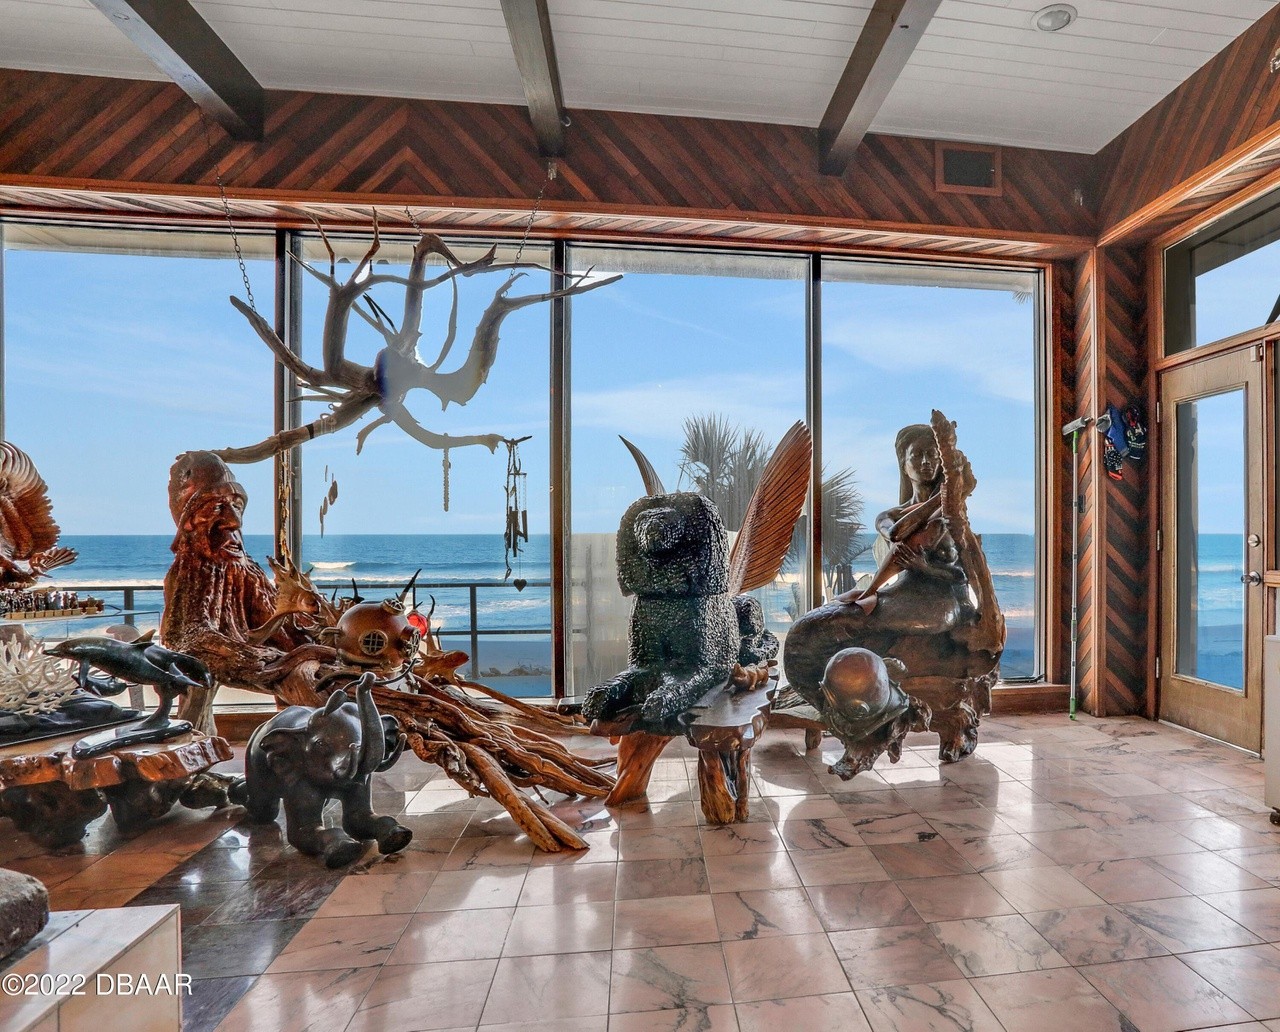 The Florida home of Hawaiian Tropic founder Ron Rice is now for sale